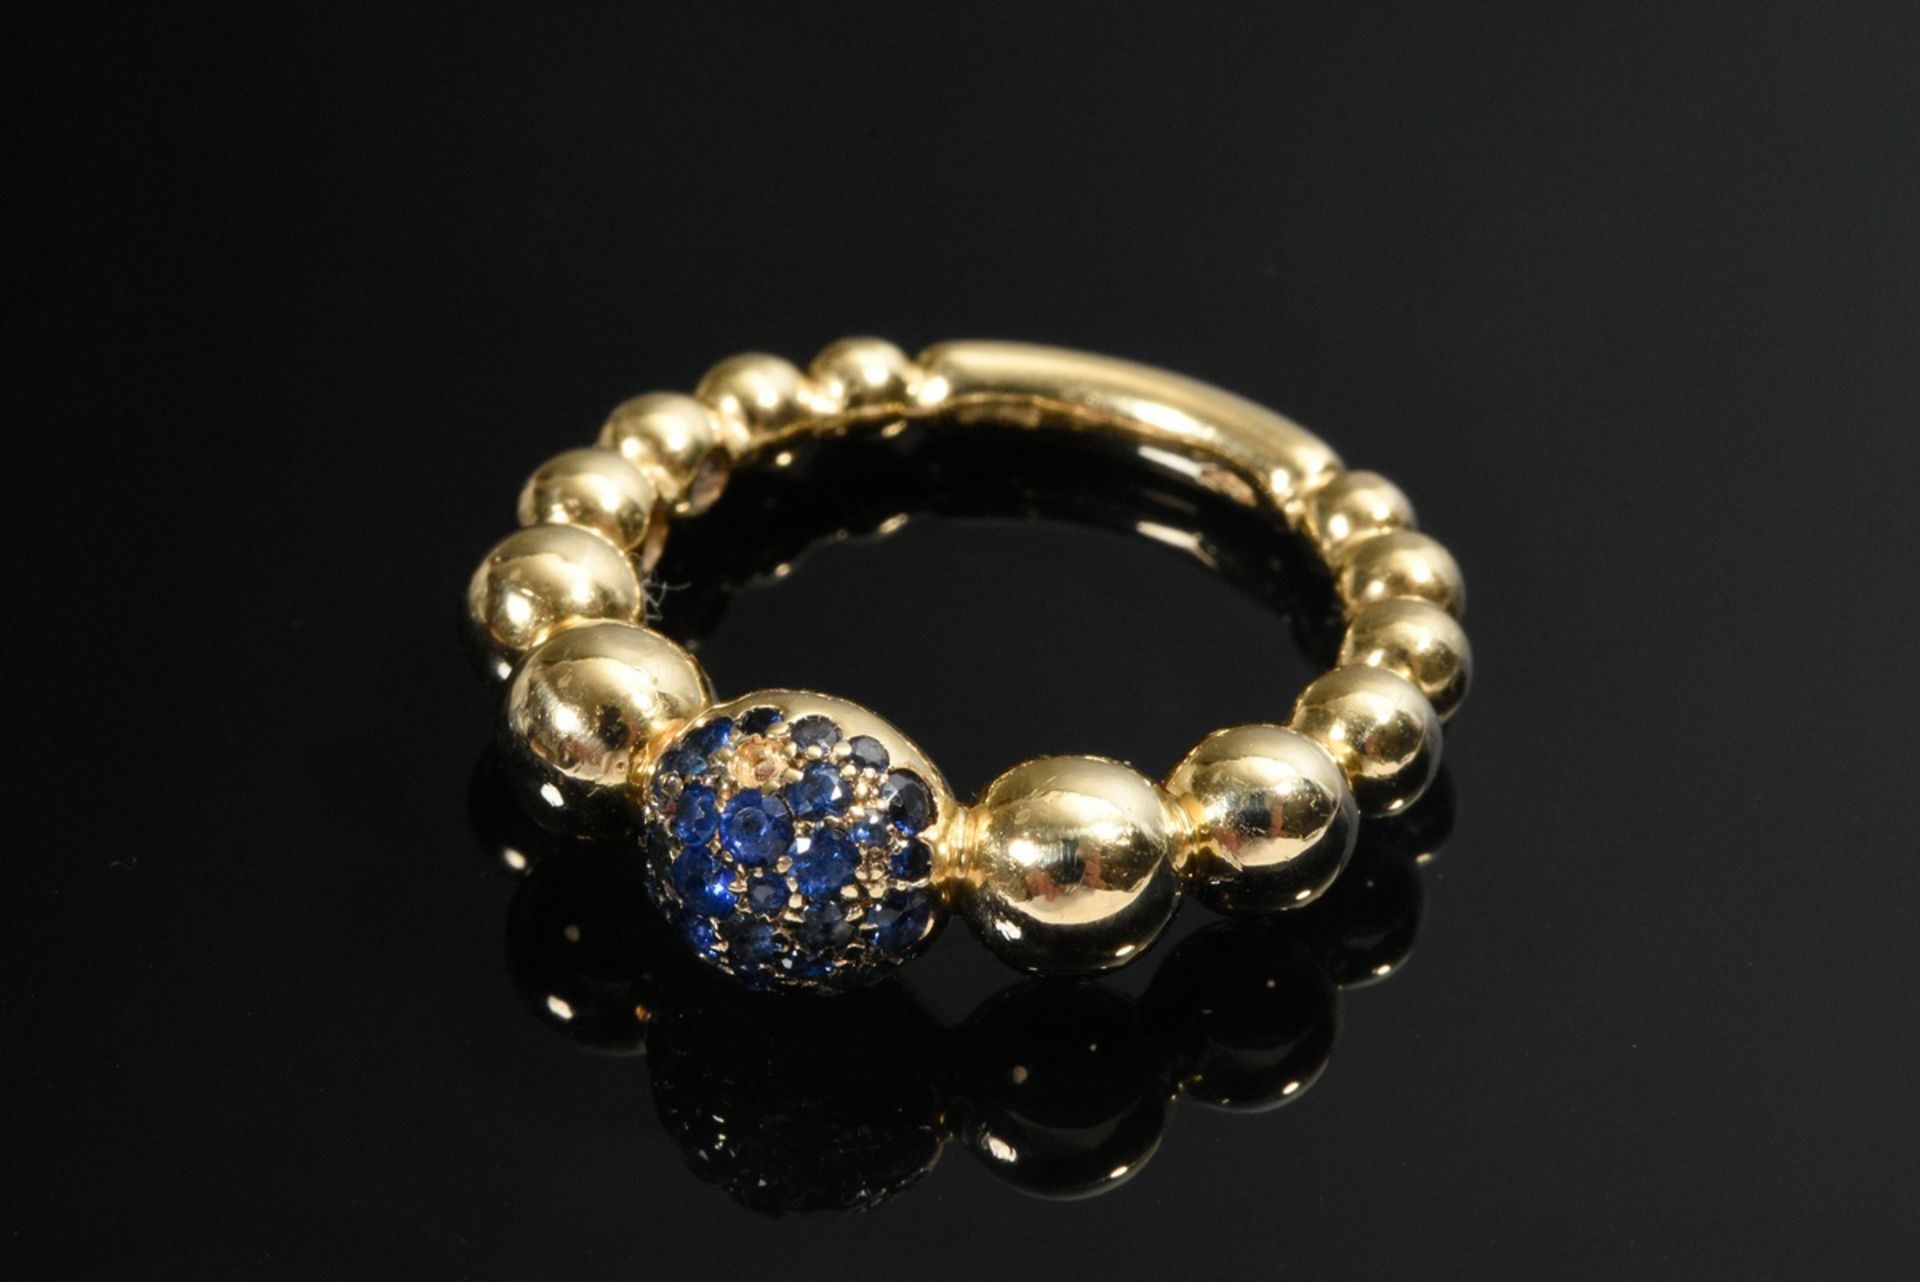 Gradient yellow gold 750 ball ring with central sapphire pavé (approx. 0.35ct), 7g, size 54, 1 ston - Image 3 of 4